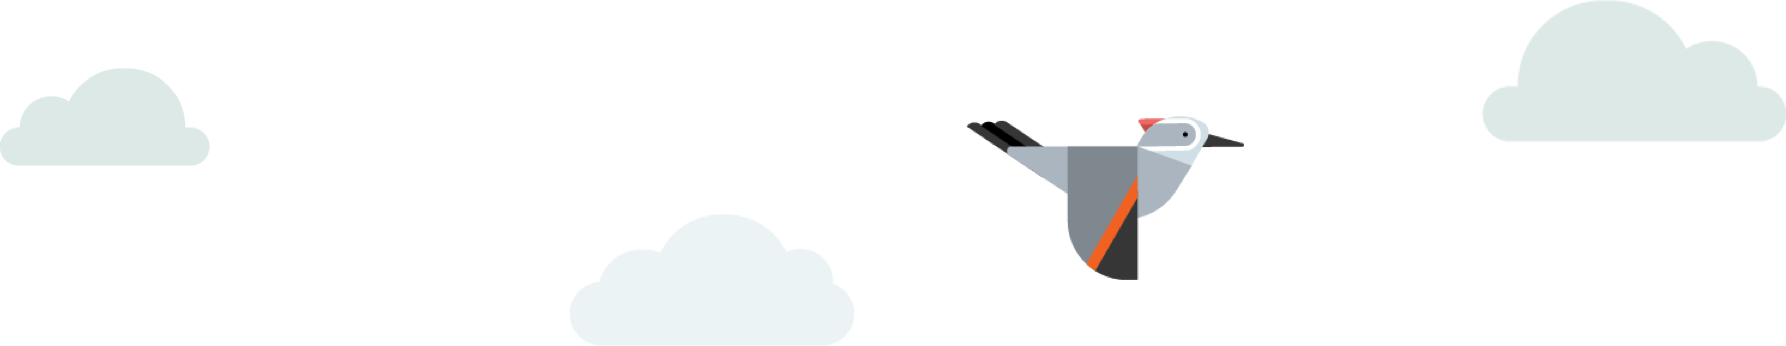 Page divider containing a bird in flight with clouds